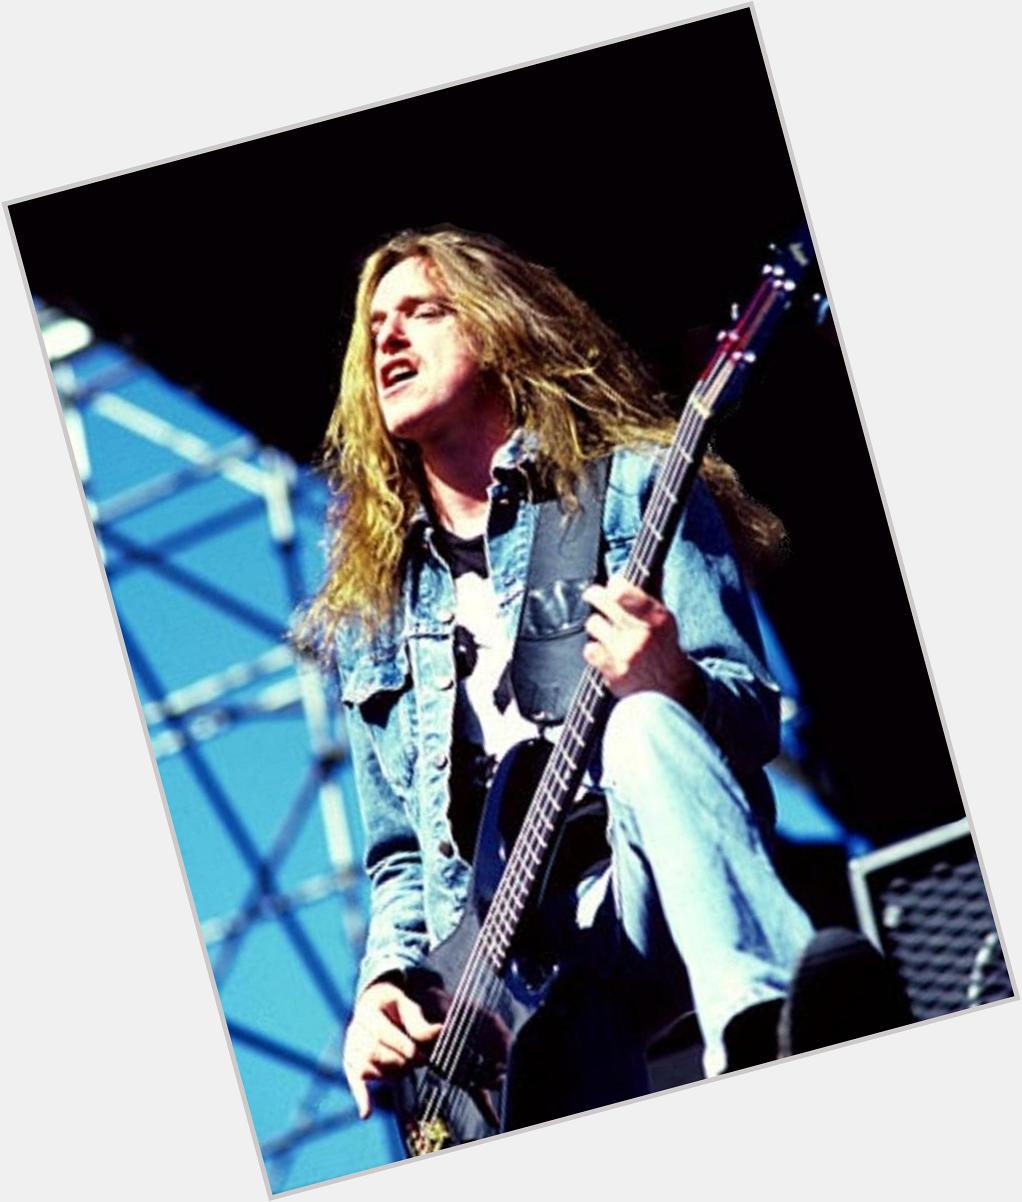 Today would have been Cliff Burton\s 53rd birthday. Happy birthday Cliff 